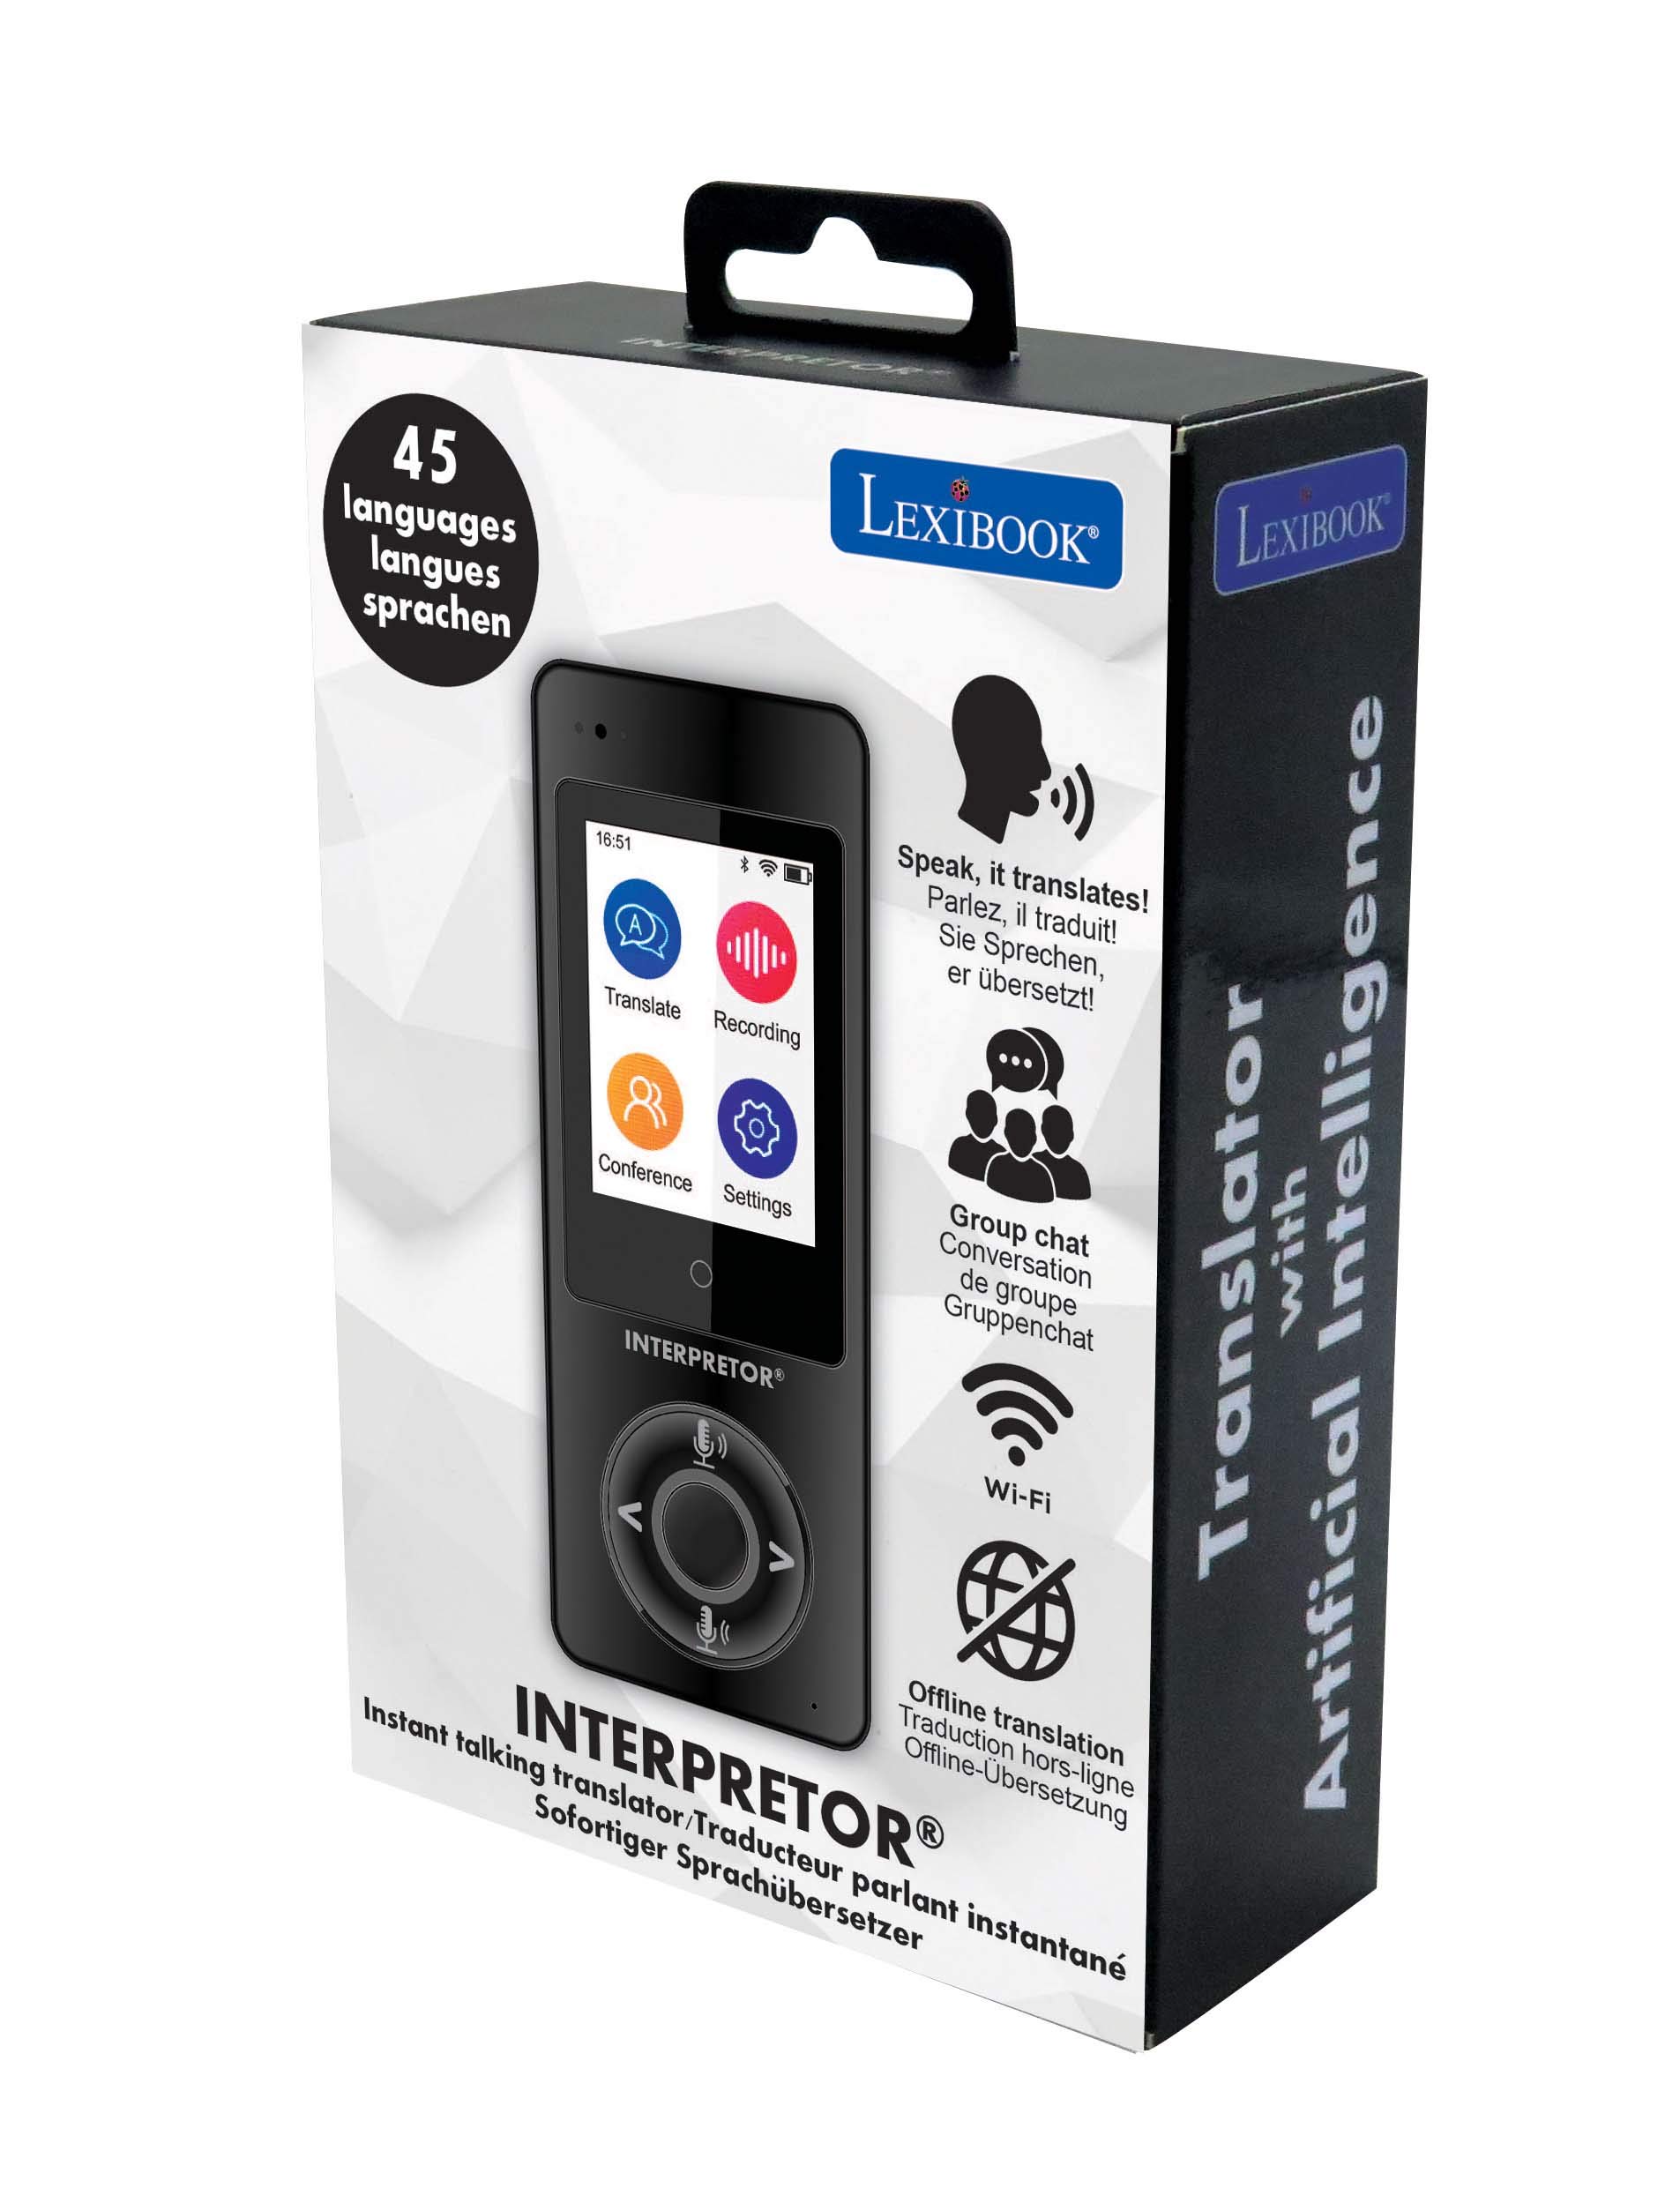 LEXiBOOK Interpretor®, Instant Talking Translator, 75 Languages, Accurate translations of Professional Quality, Touch-Screen, Group Chat Function, Headphones Jack, Bluetooth, WiFi, Black, NTL2000